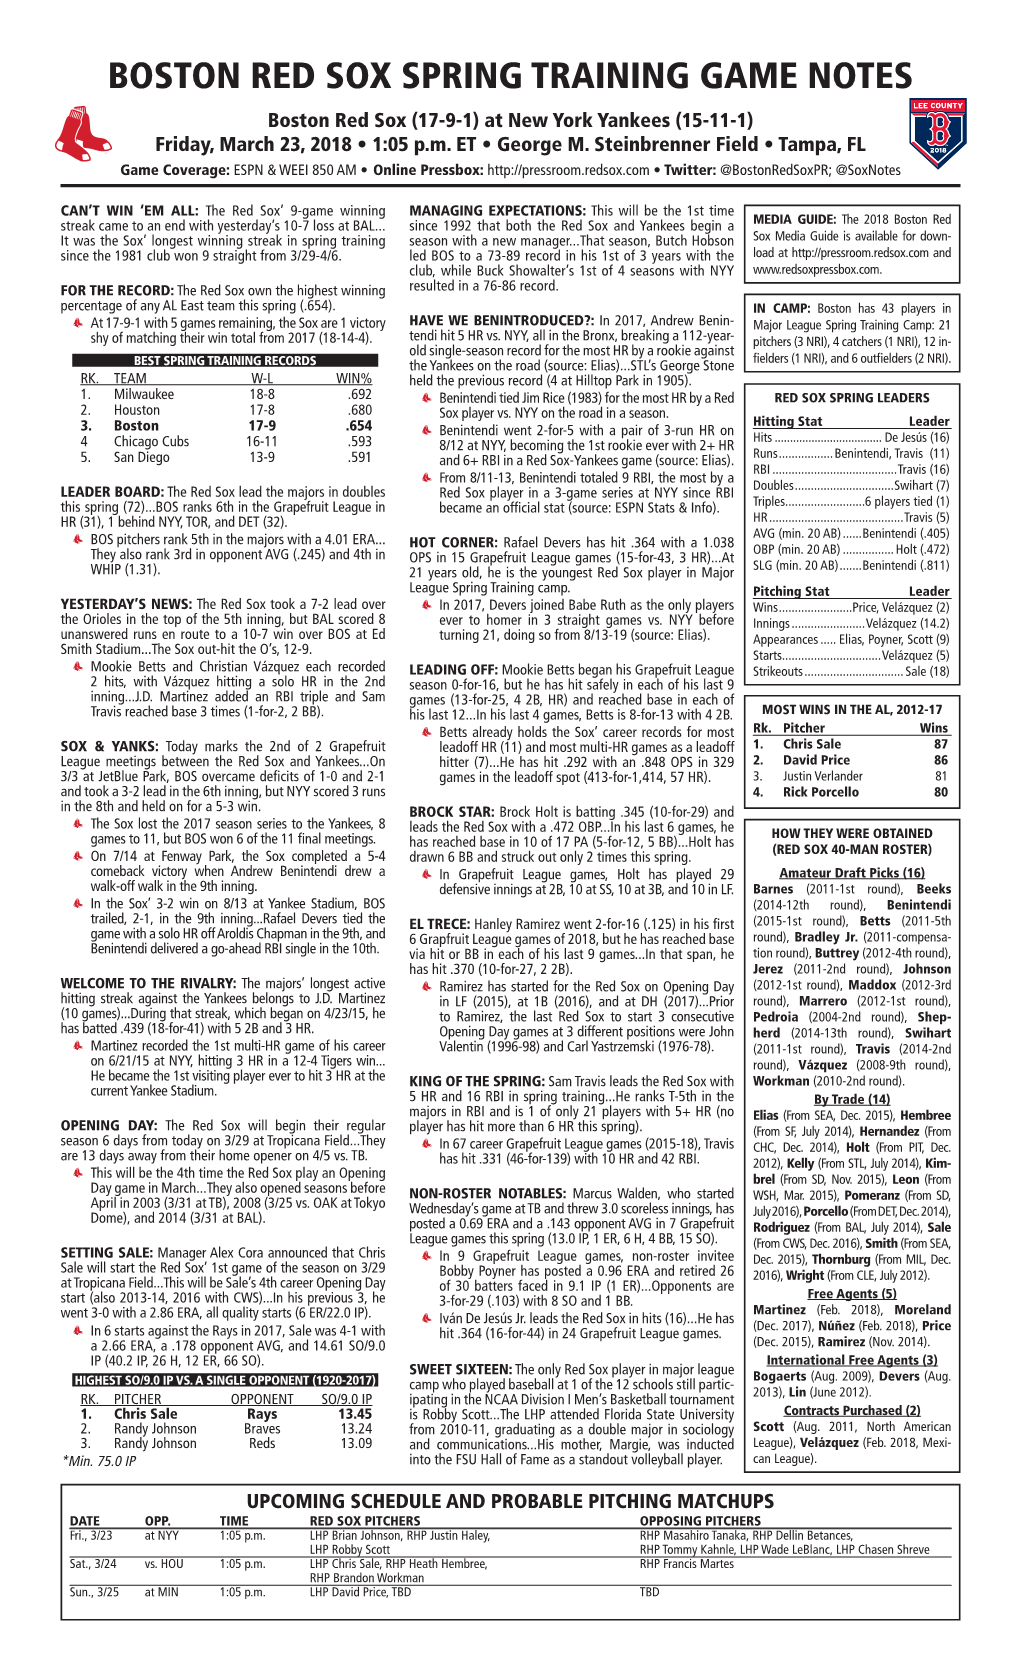 BOSTON RED SOX SPRING TRAINING GAME NOTES Boston Red Sox (17-9-1) at New York Yankees (15-11-1) Friday, March 23, 2018 • 1:05 P.M